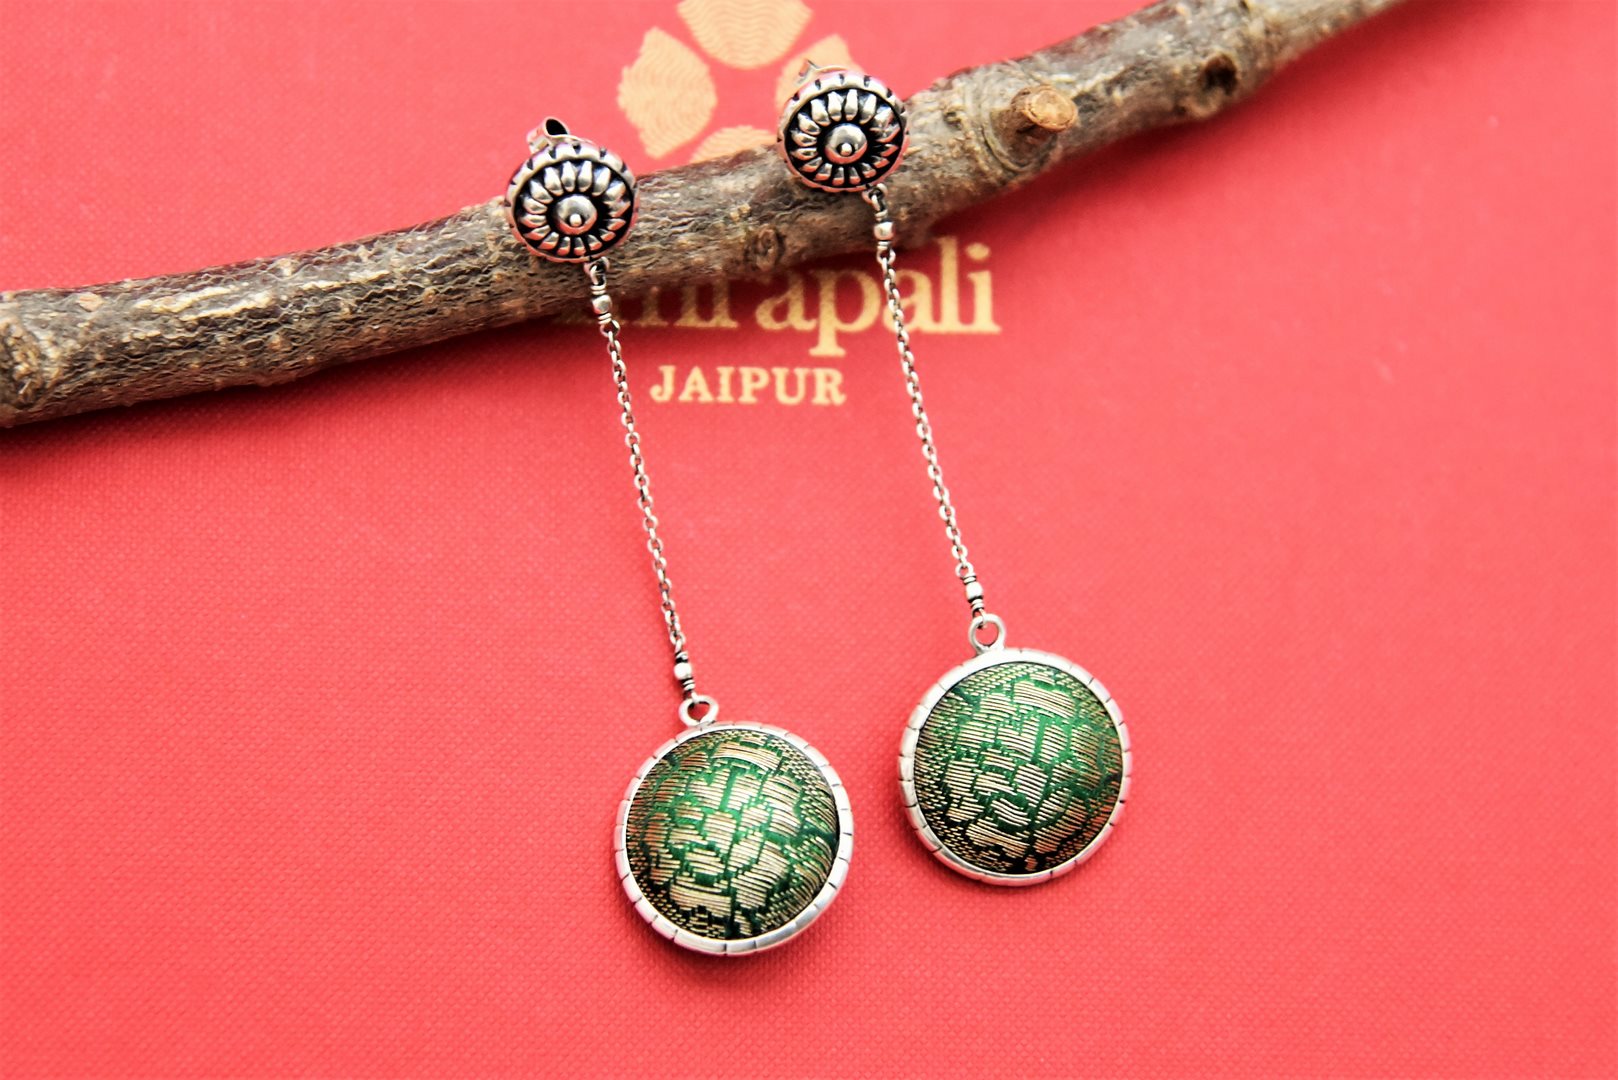 Buy Amrapali silver earrings online in USA with green fabric ball. Buy beautiful silver jewelry, gold plated jewelry, silver earrings, wedding jewelry from Pure Elegance Indian fashion store in USA. -full view